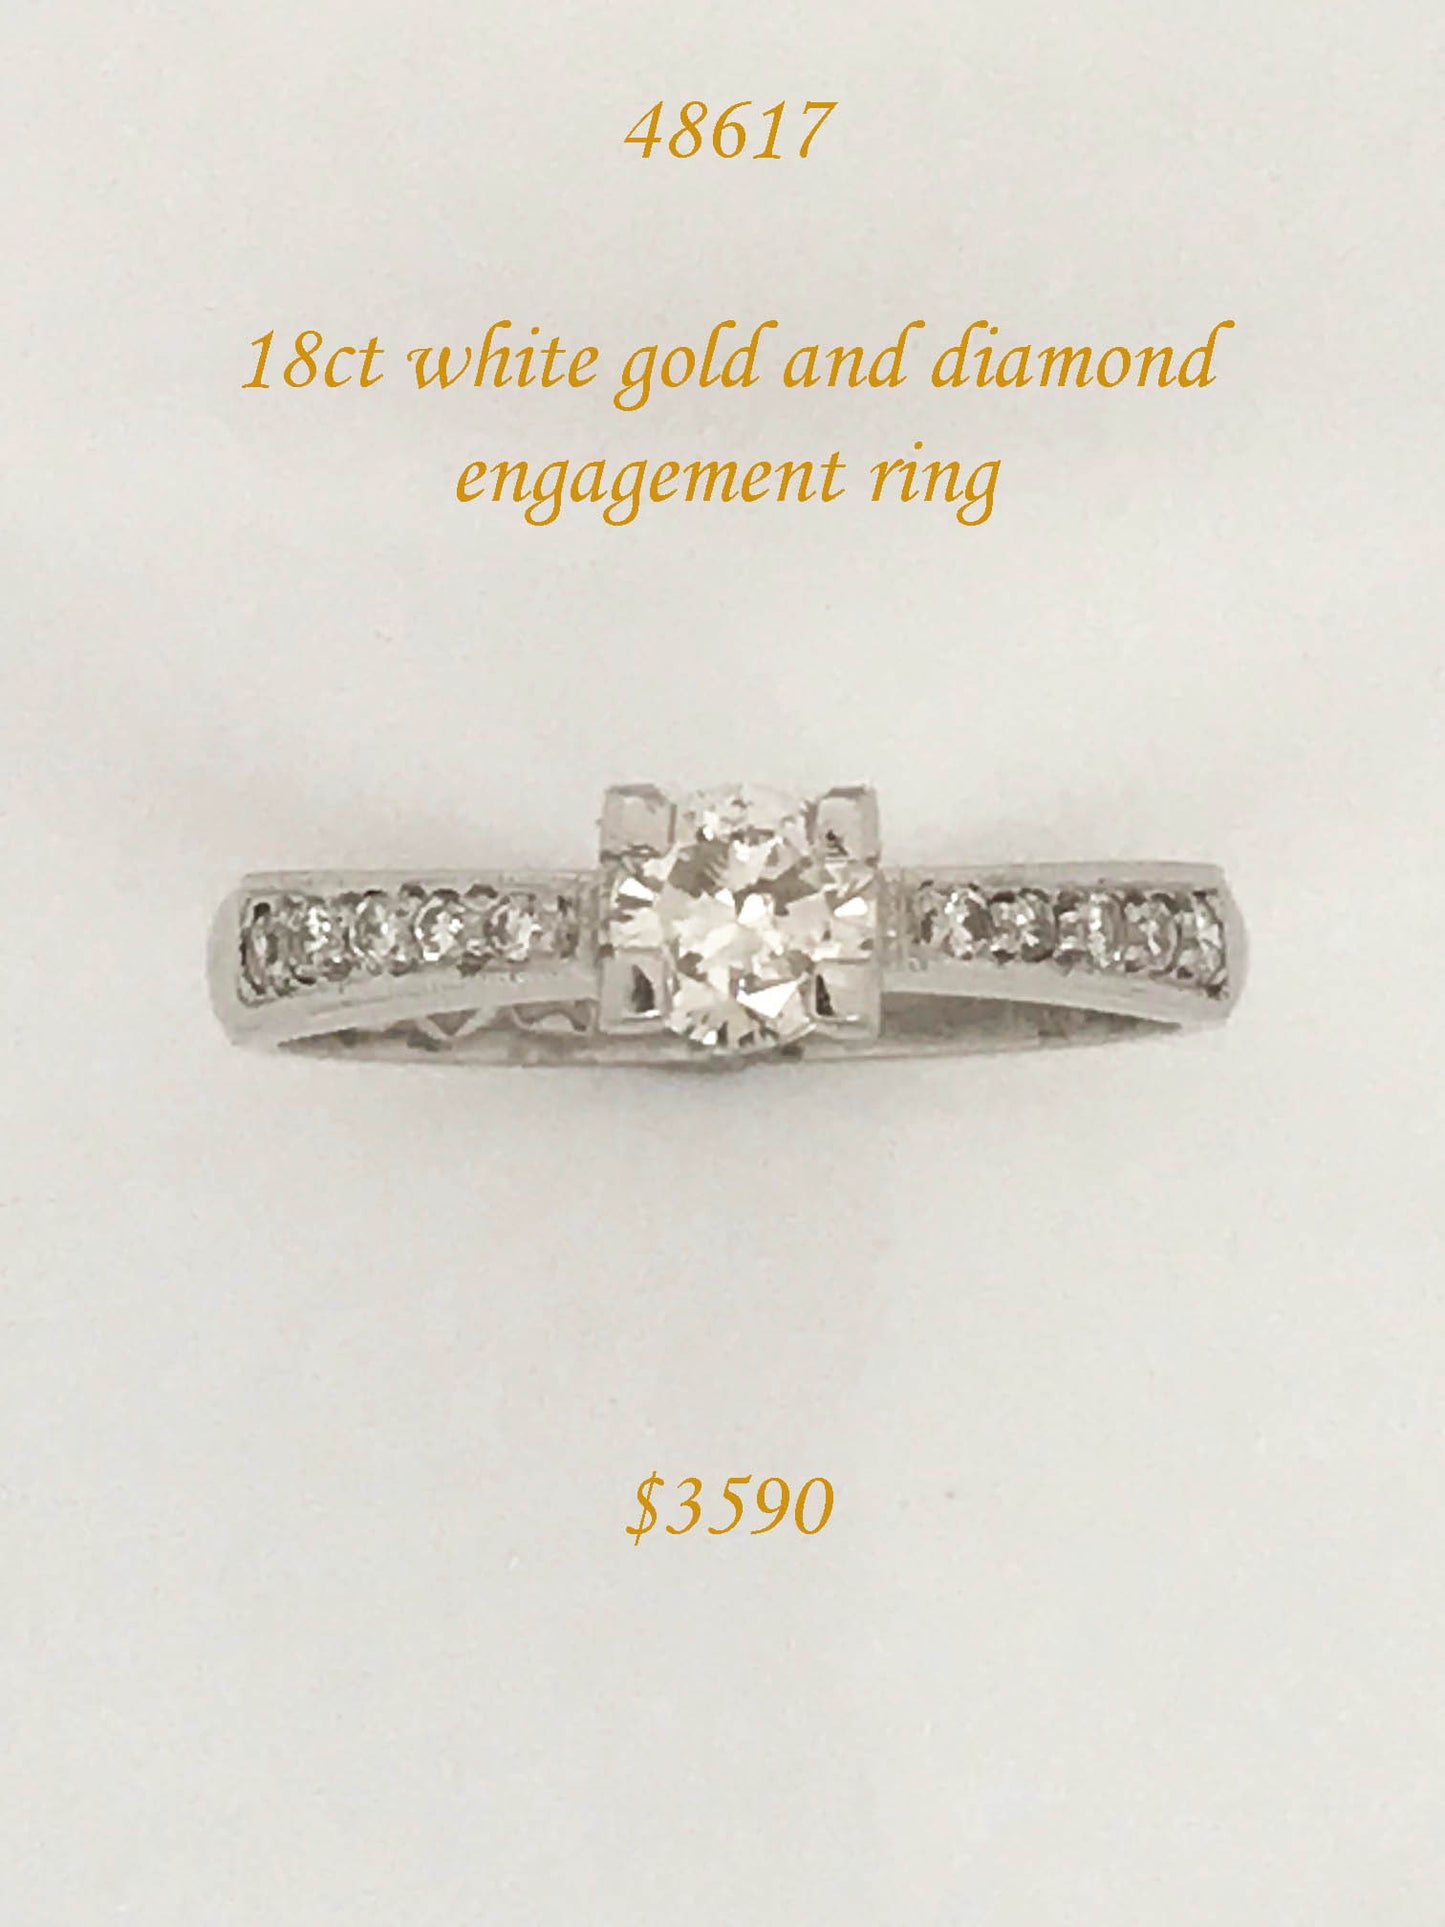 Classic 18ct white gold and diamond engagement ring.